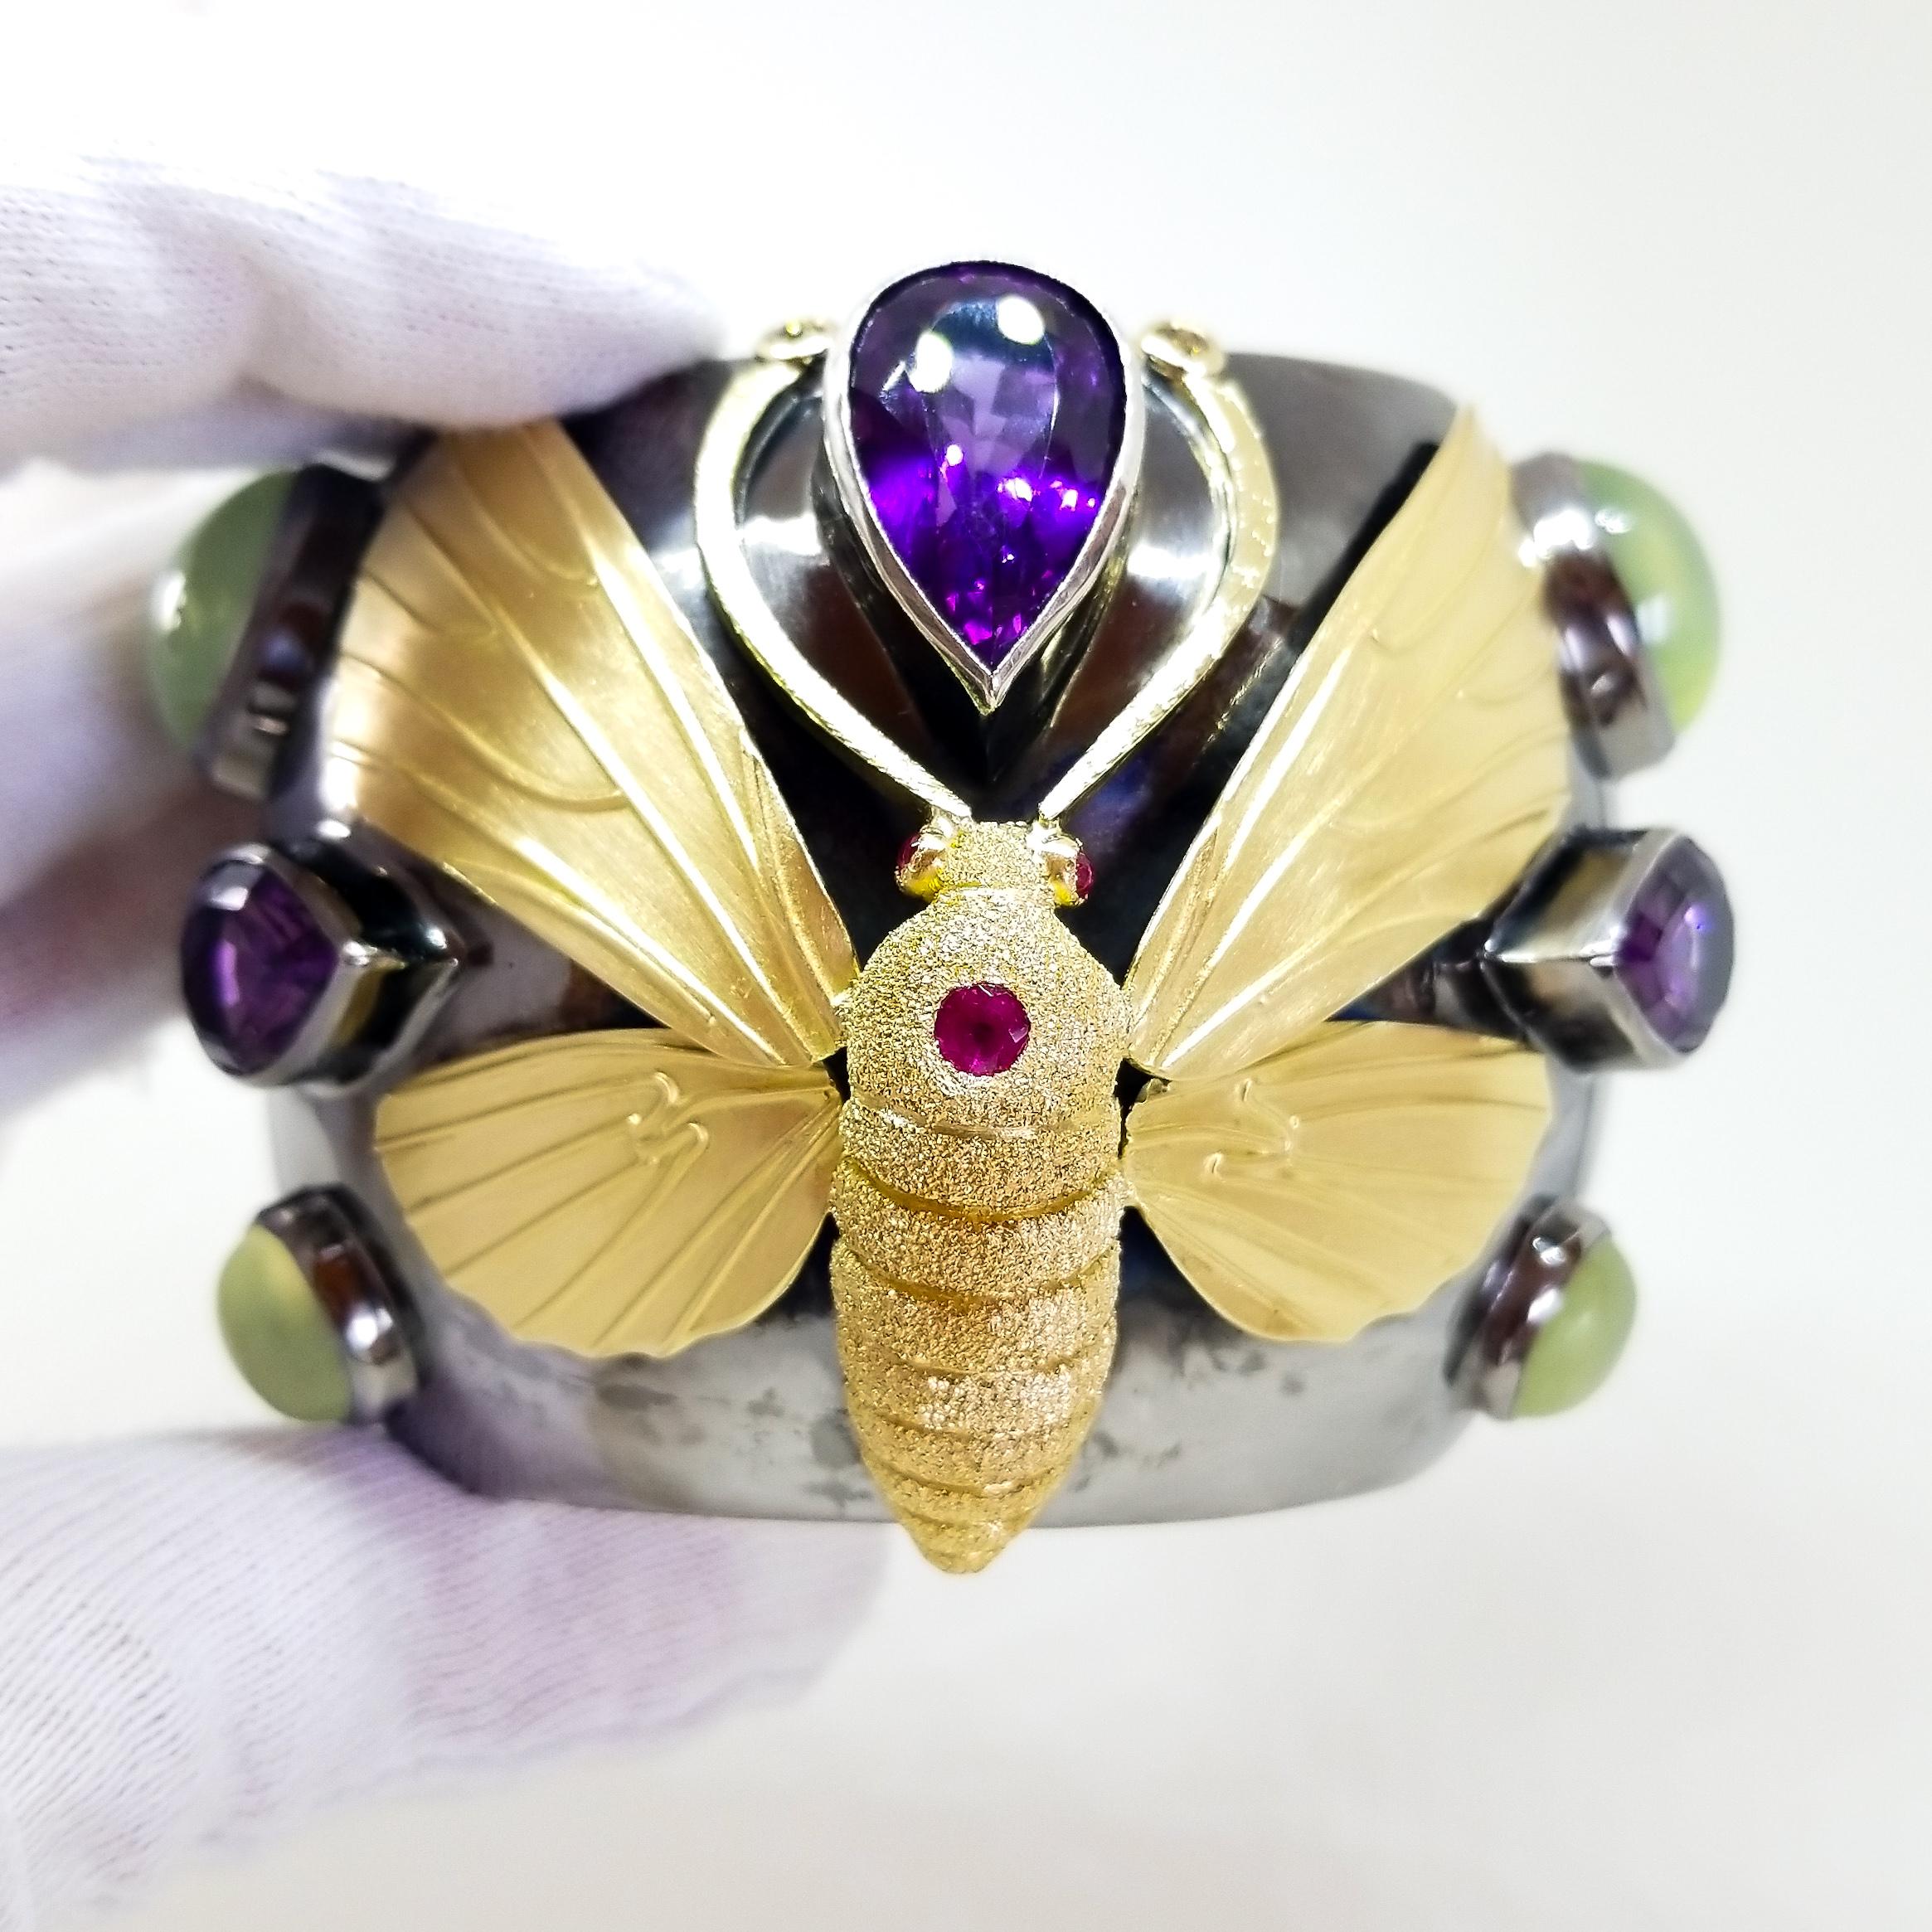 Mixed Cut Tom Castor Collection One of a Kind 60+ Carat Award Winning Moth Cuff Bracelet For Sale